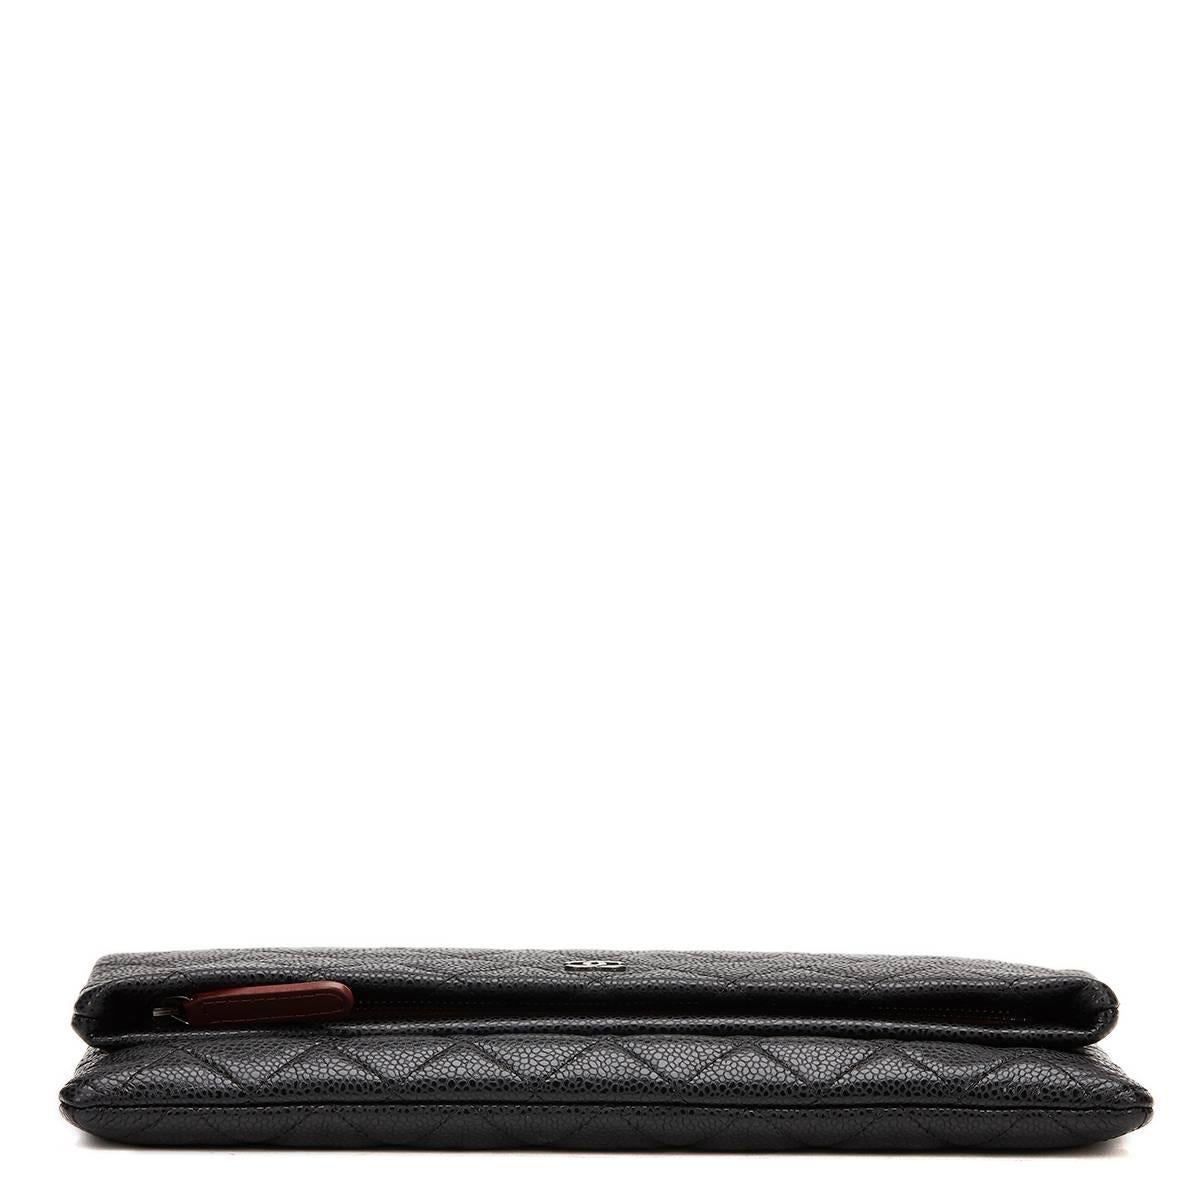 CHANEL
Black Quilted Caviar Leather Beauty CC Foldover Clutch

This CHANEL Beauty CC Foldover Clutch is in Excellent Pre-Owned Condition accompanied by Chanel Dust Bag, Authenticity Card. Circa 2015. Primarily made from Caviar Leather complimented